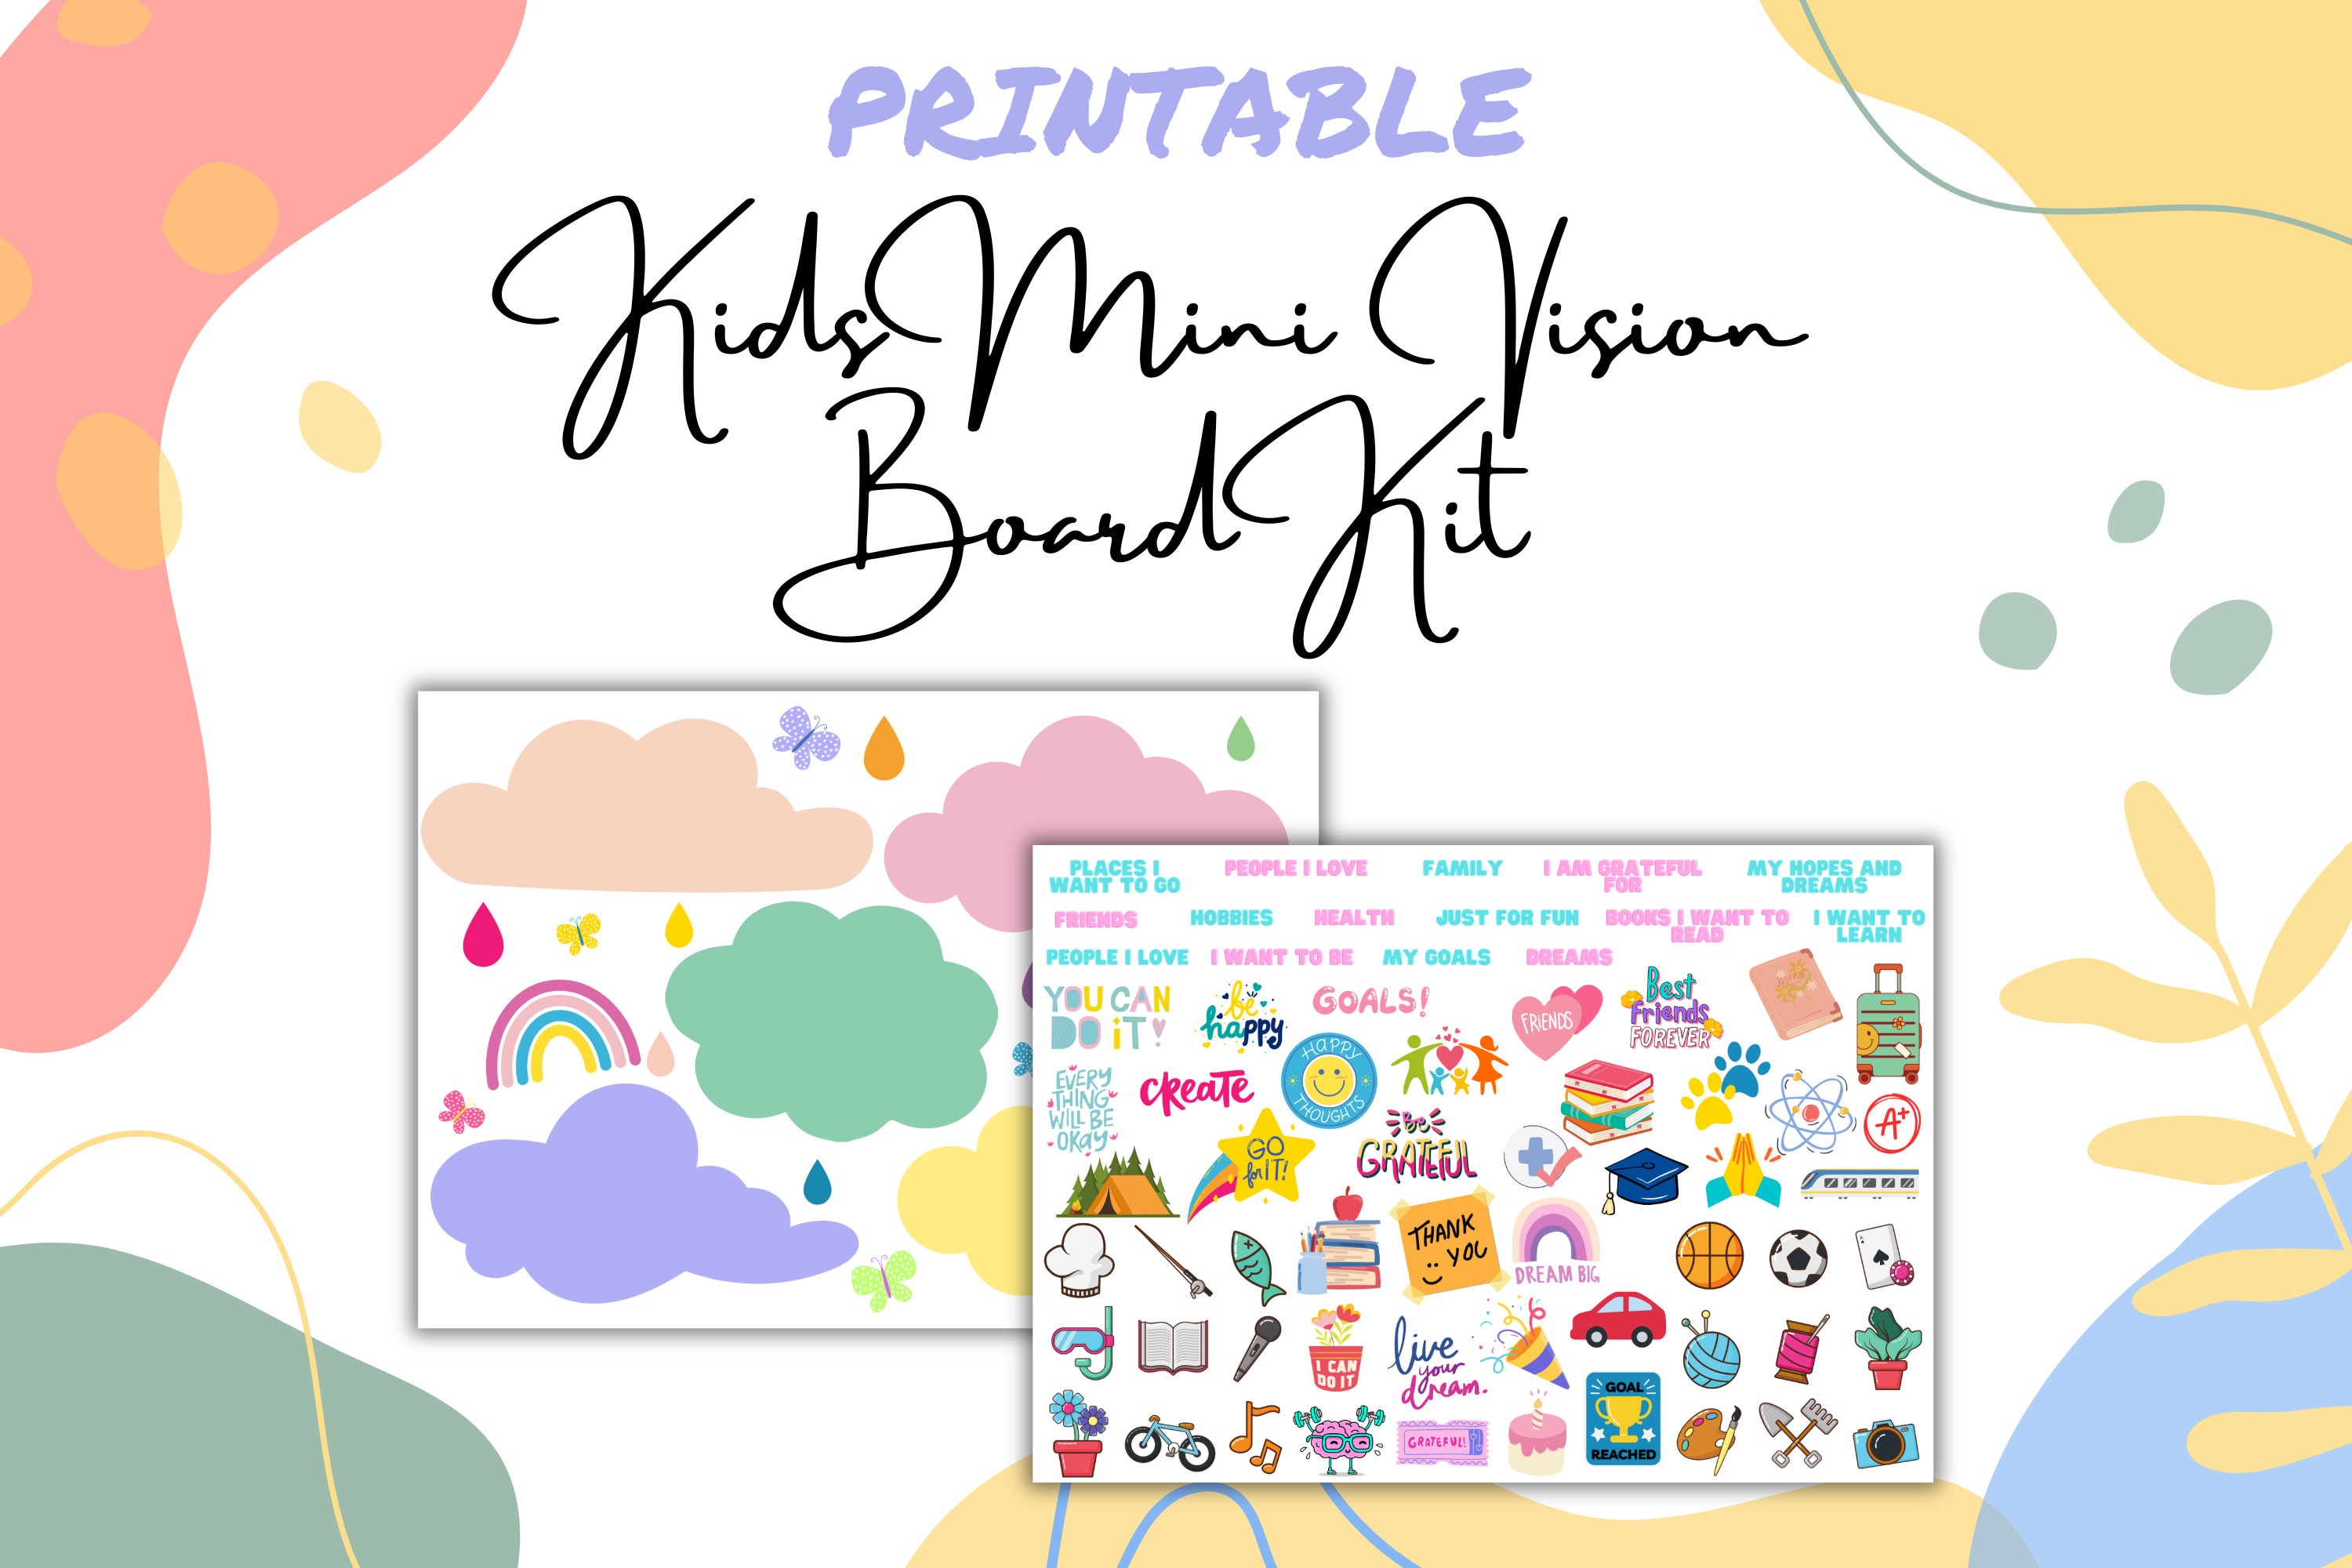 Hustle Girl Vision Board Kit With Printable Photos 4x6 Images